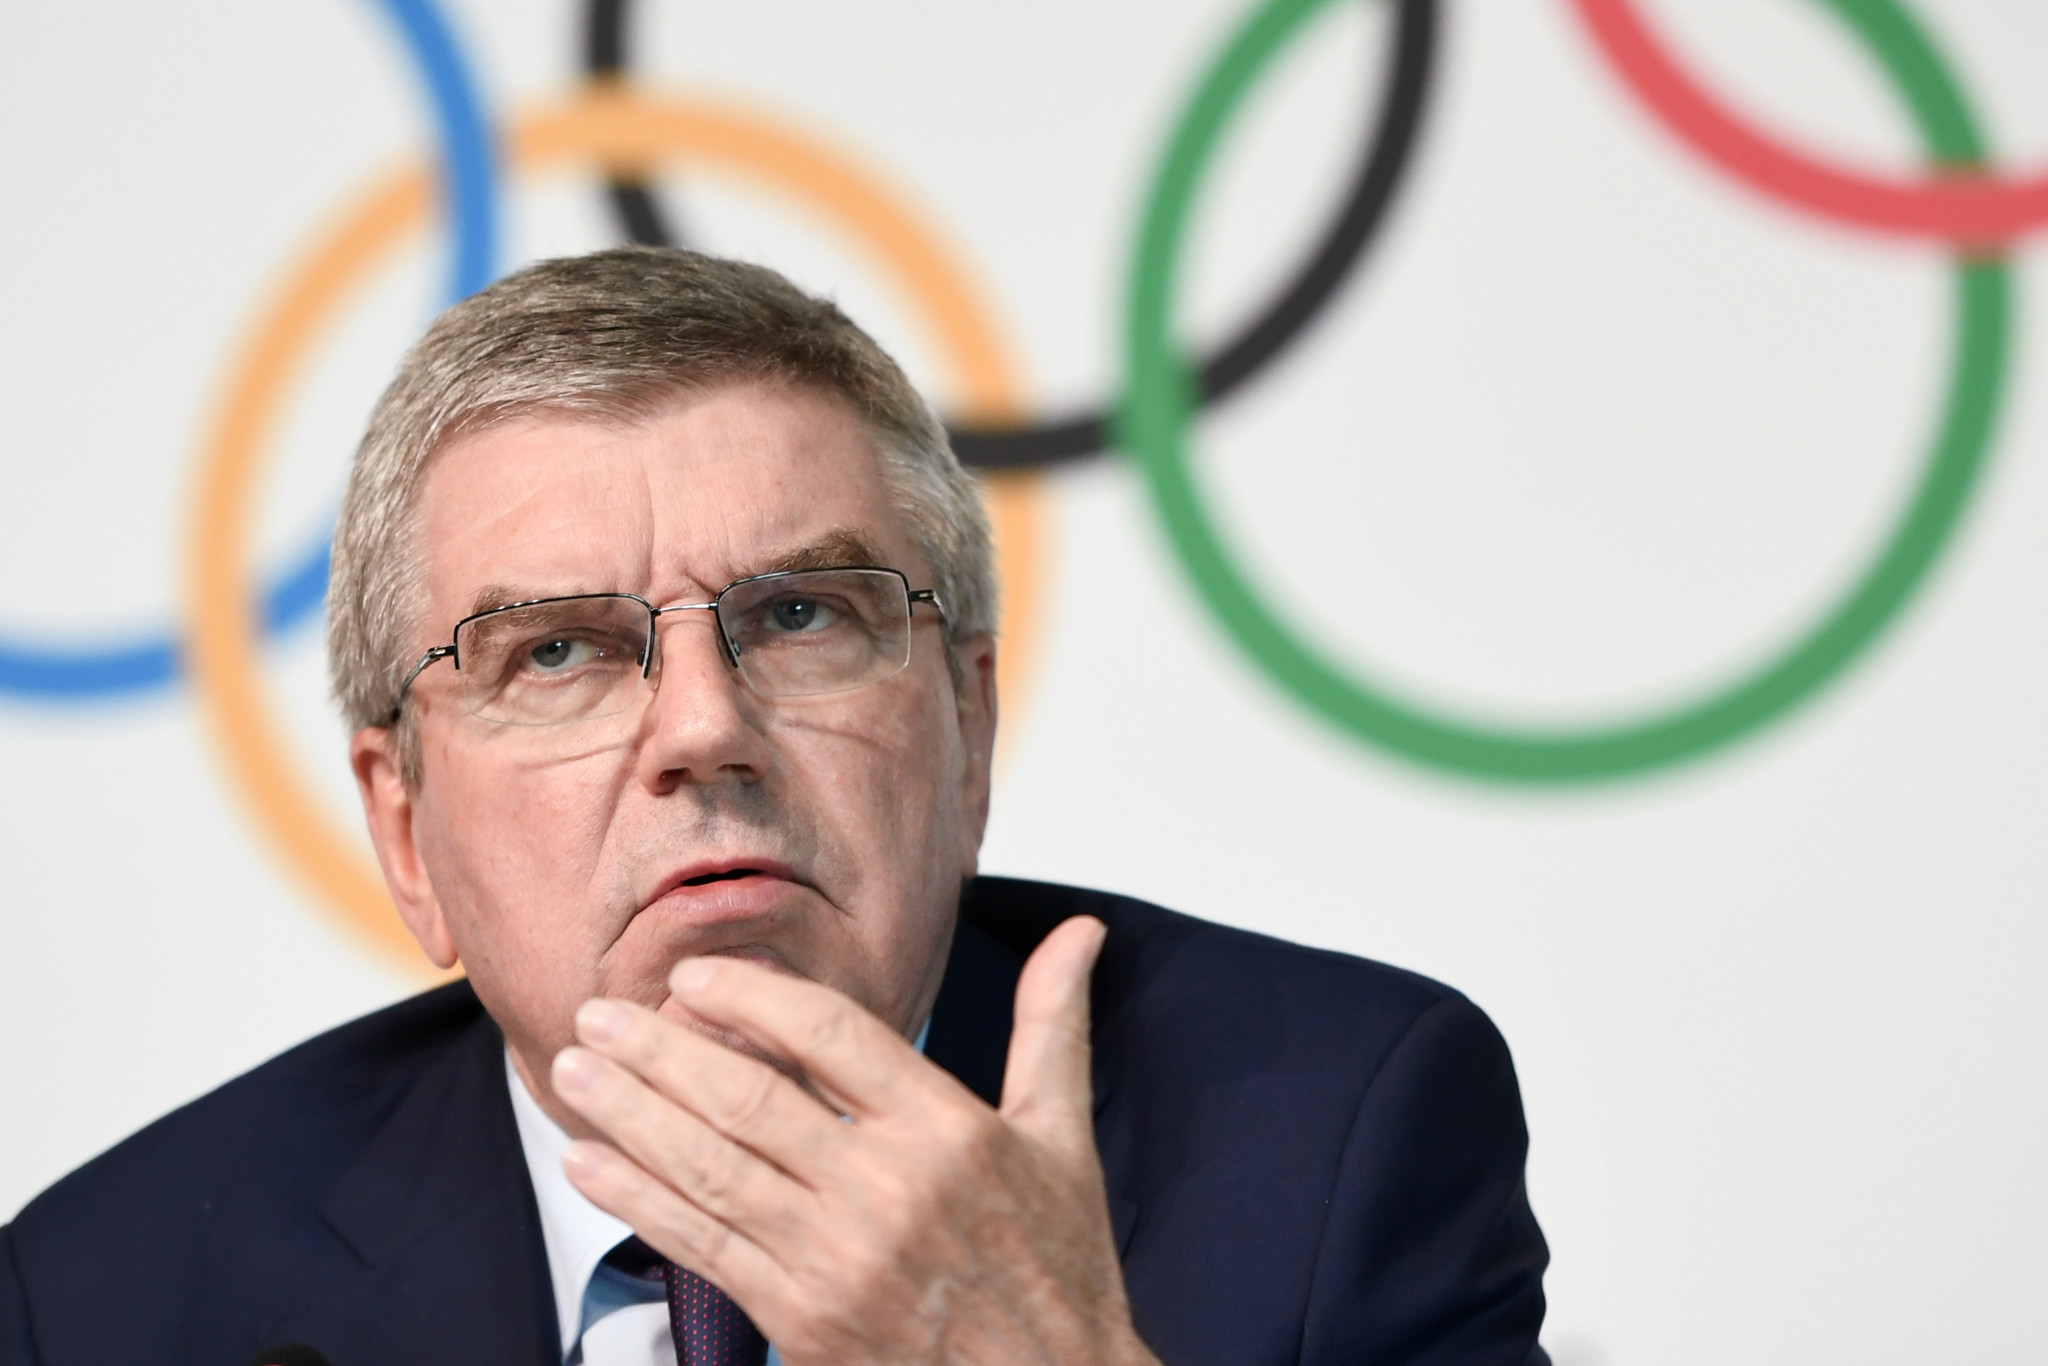 Bach suggests IOC could recommend a single city to host Olympic Games but dismisses claims it will end bidding contests